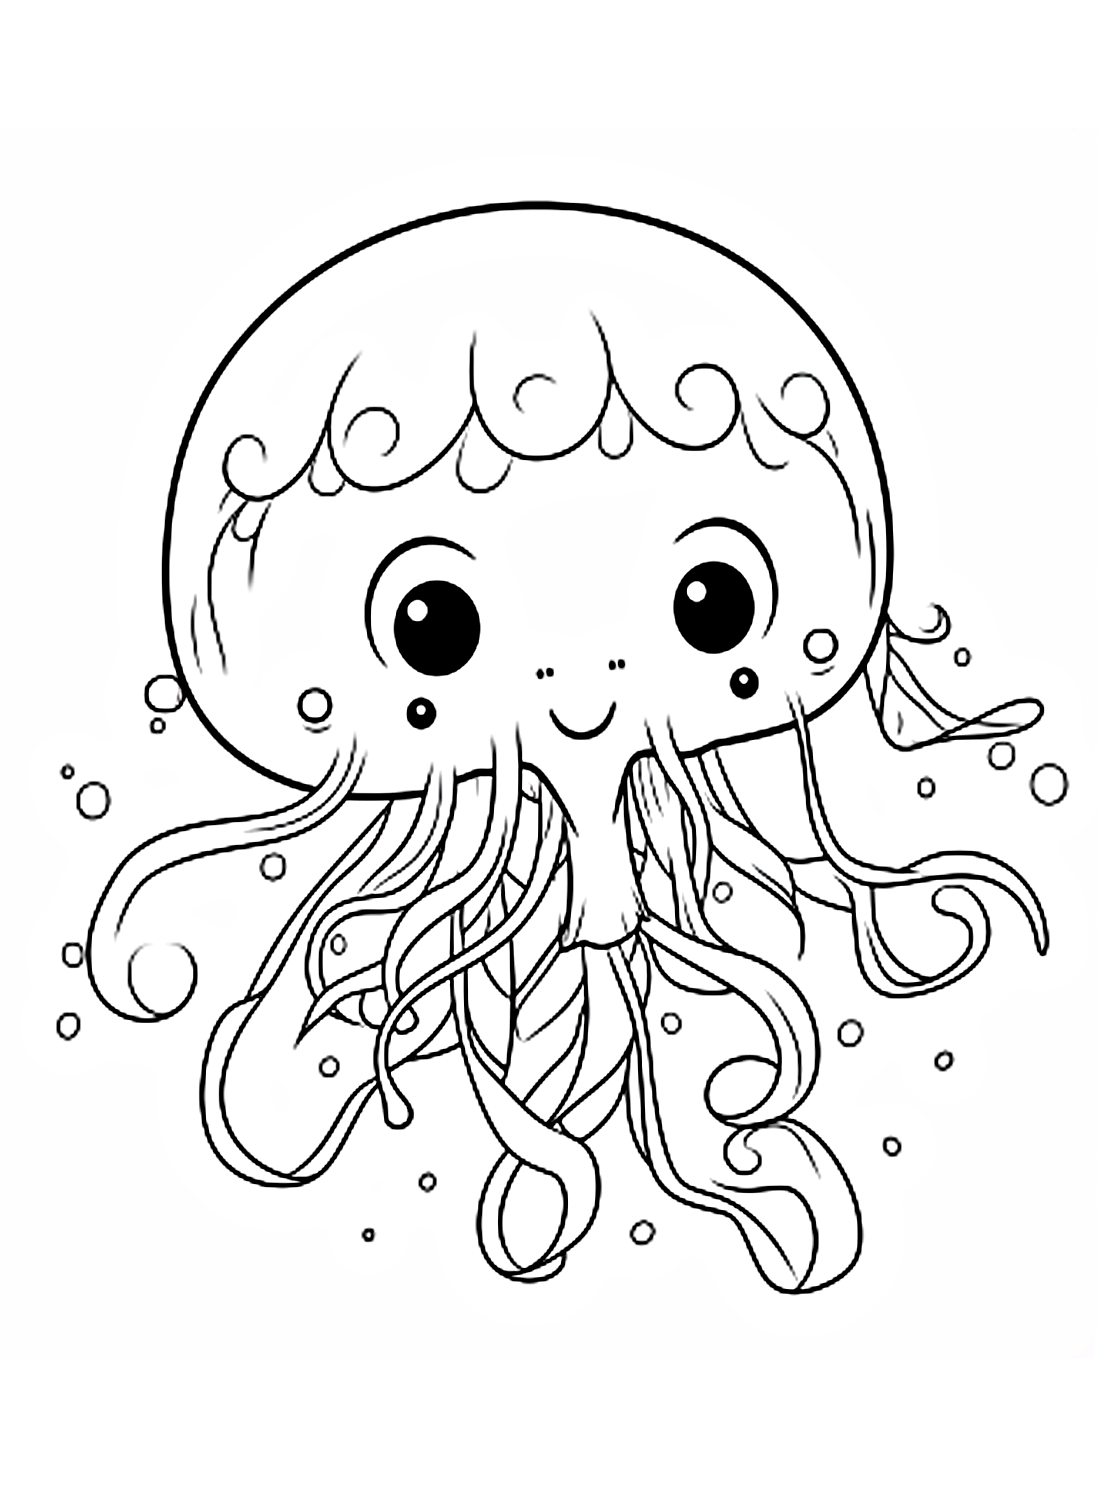 A little Jellyfish Coloring Page